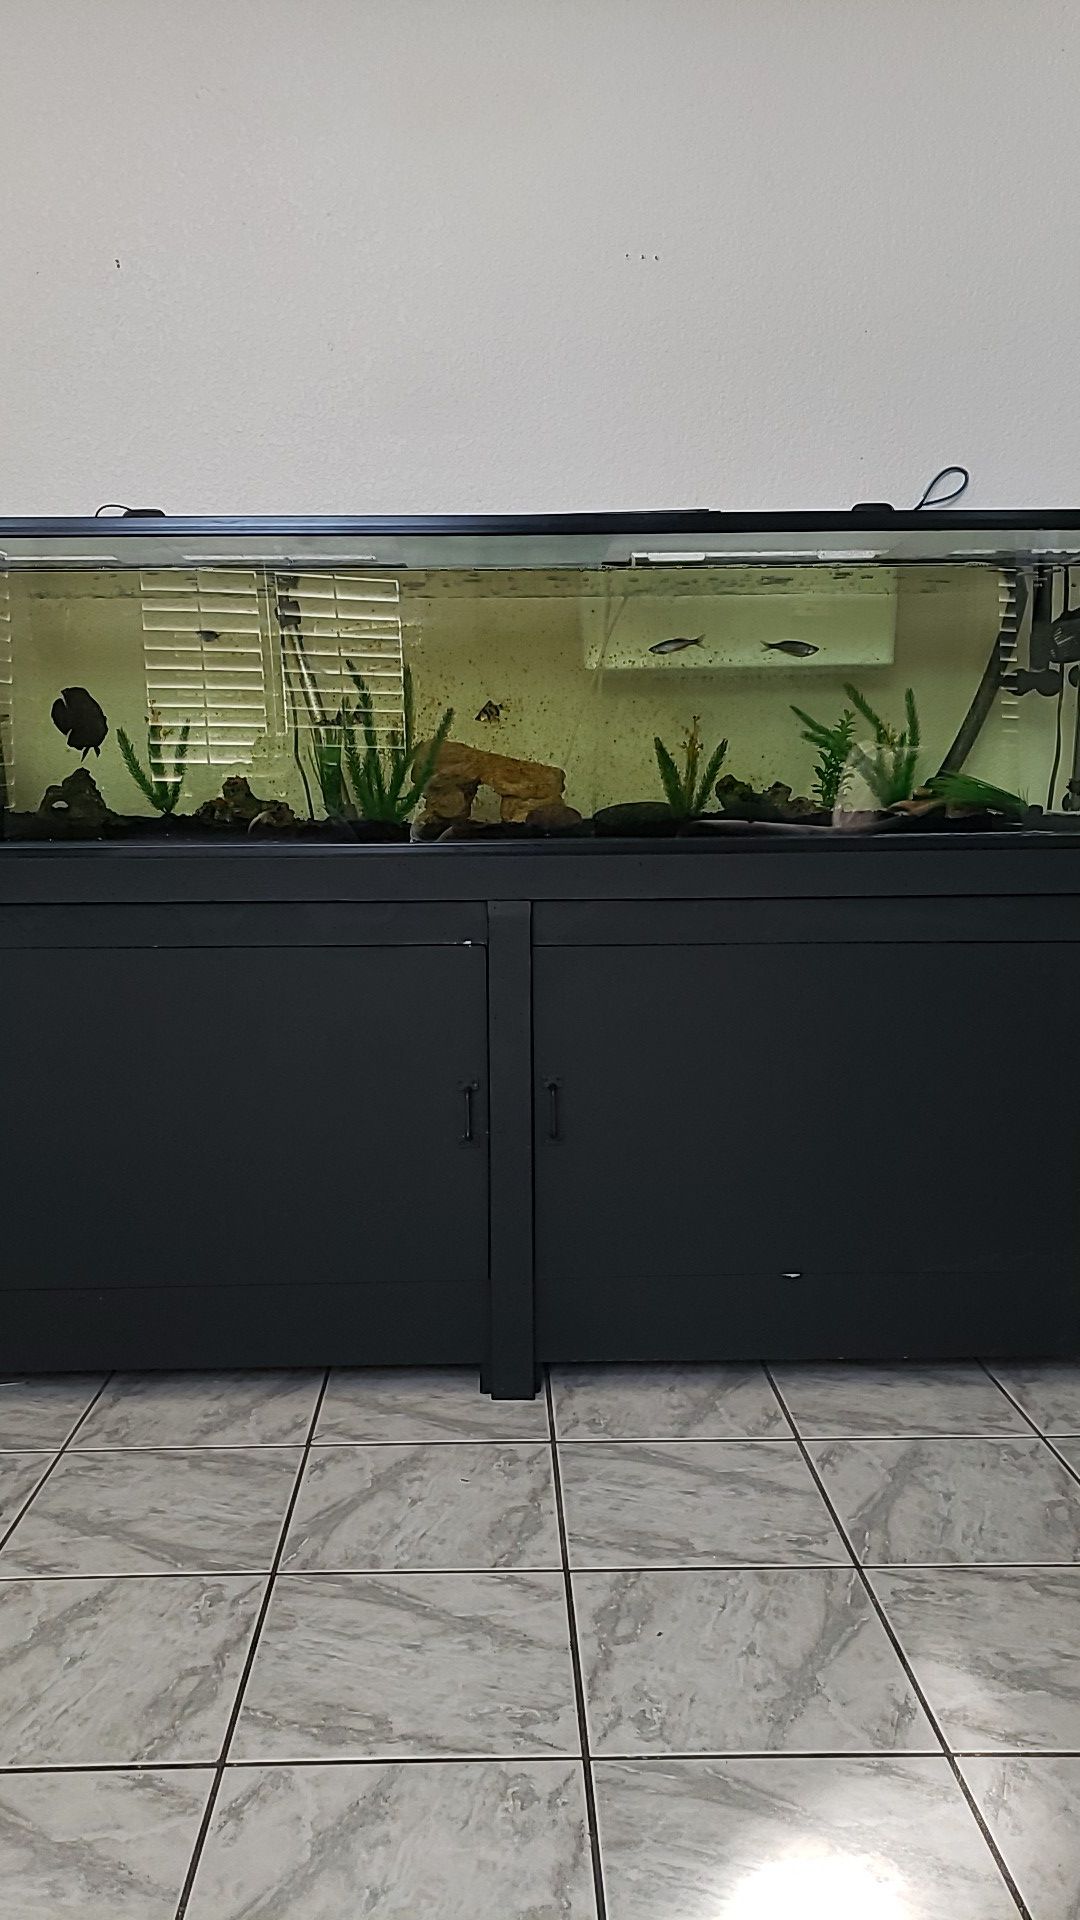 90 gallon fish tank and stand comes with decorations light and heater. And fx4 filter .Fish available. No leaks